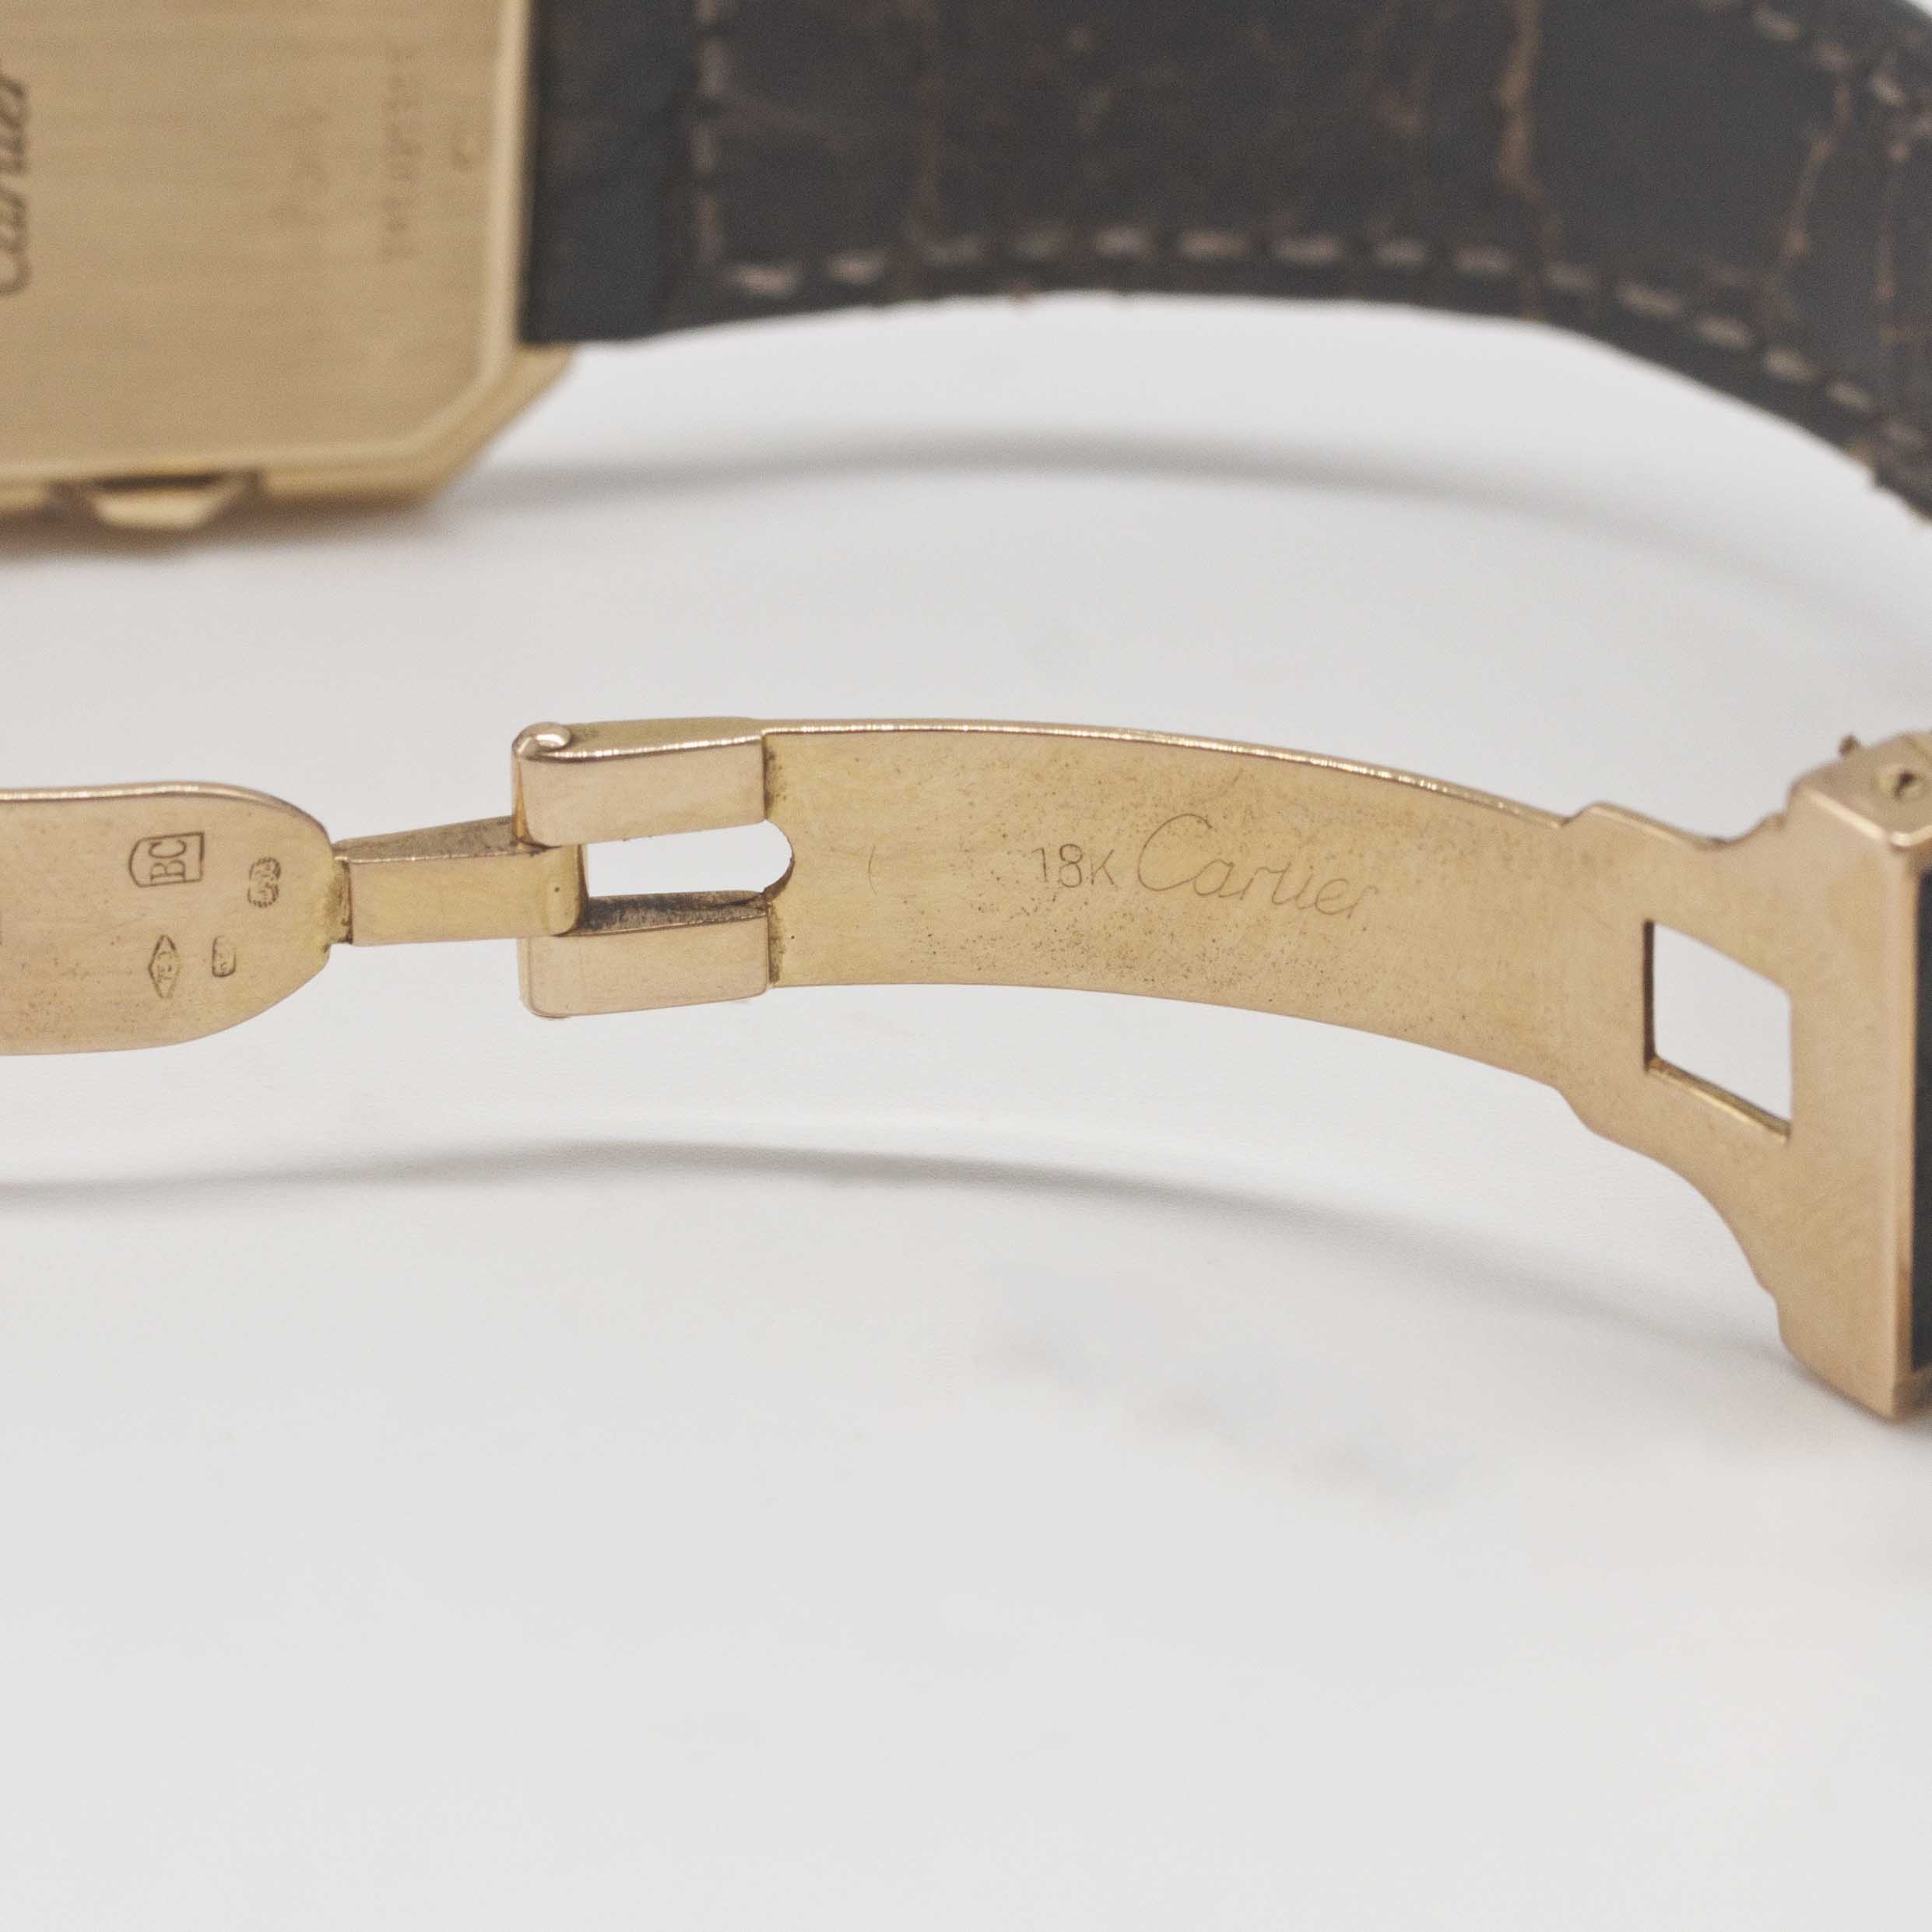 A LADIES 18K SOLID GOLD CARTIER CEINTURE WRIST WATCH CIRCA 1980 Movement: 17J, manual wind, cal. - Image 9 of 11